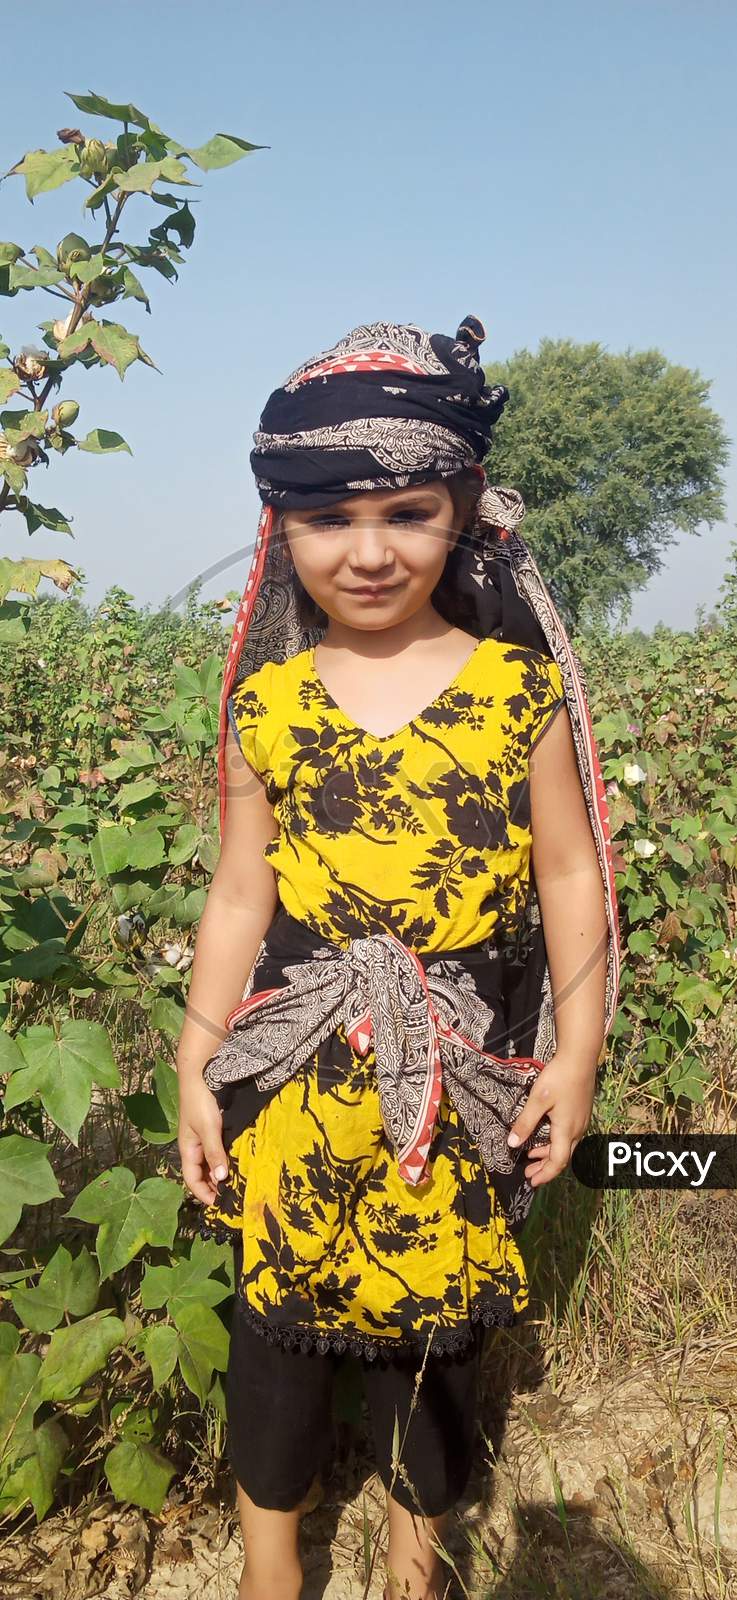 Rural Child Girl Picking Cotton In Field Outdoors,Traditional Scarf Jholi,Village Life Daylight